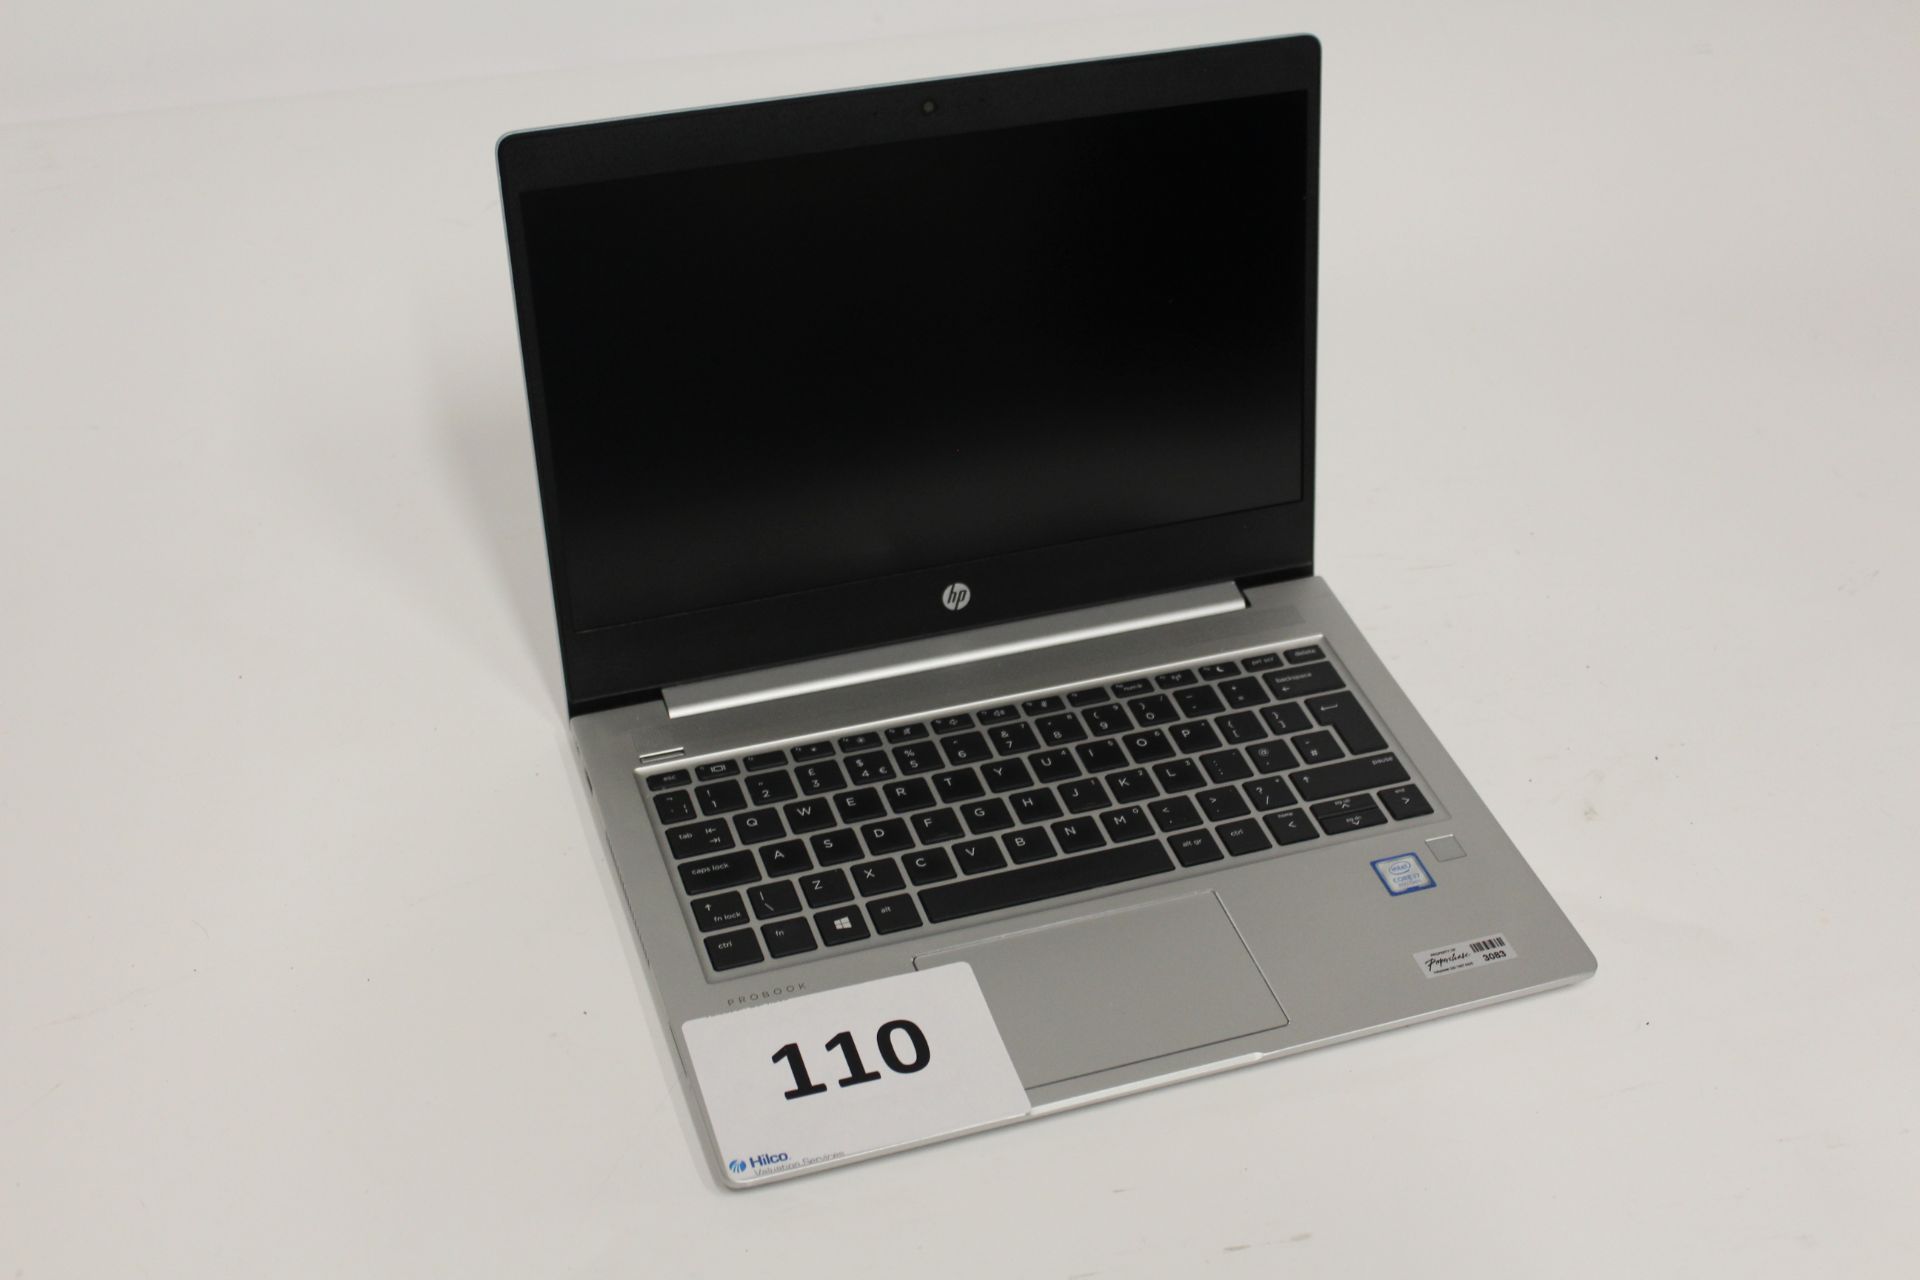 HP Probook 430 G6 Core i7 8th Generation Laptop Computer S/N 5CD0115HT1. No charger